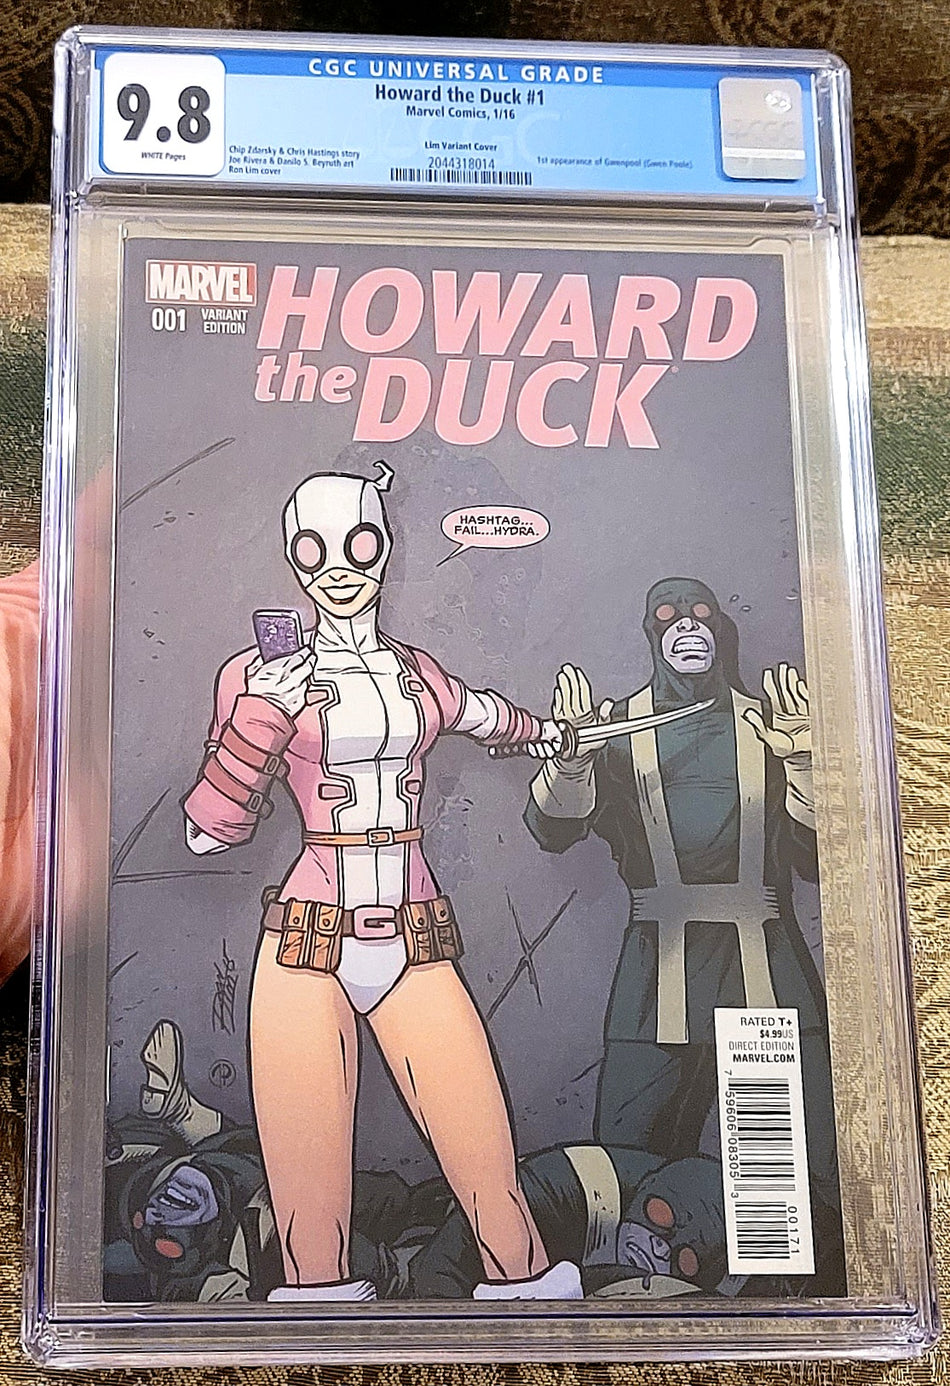 Howard the Duck V5 (2015) #1 CGC 9.8 1:25 Ron Lim Ratio Variant (1st Appearance of Gwenpool)